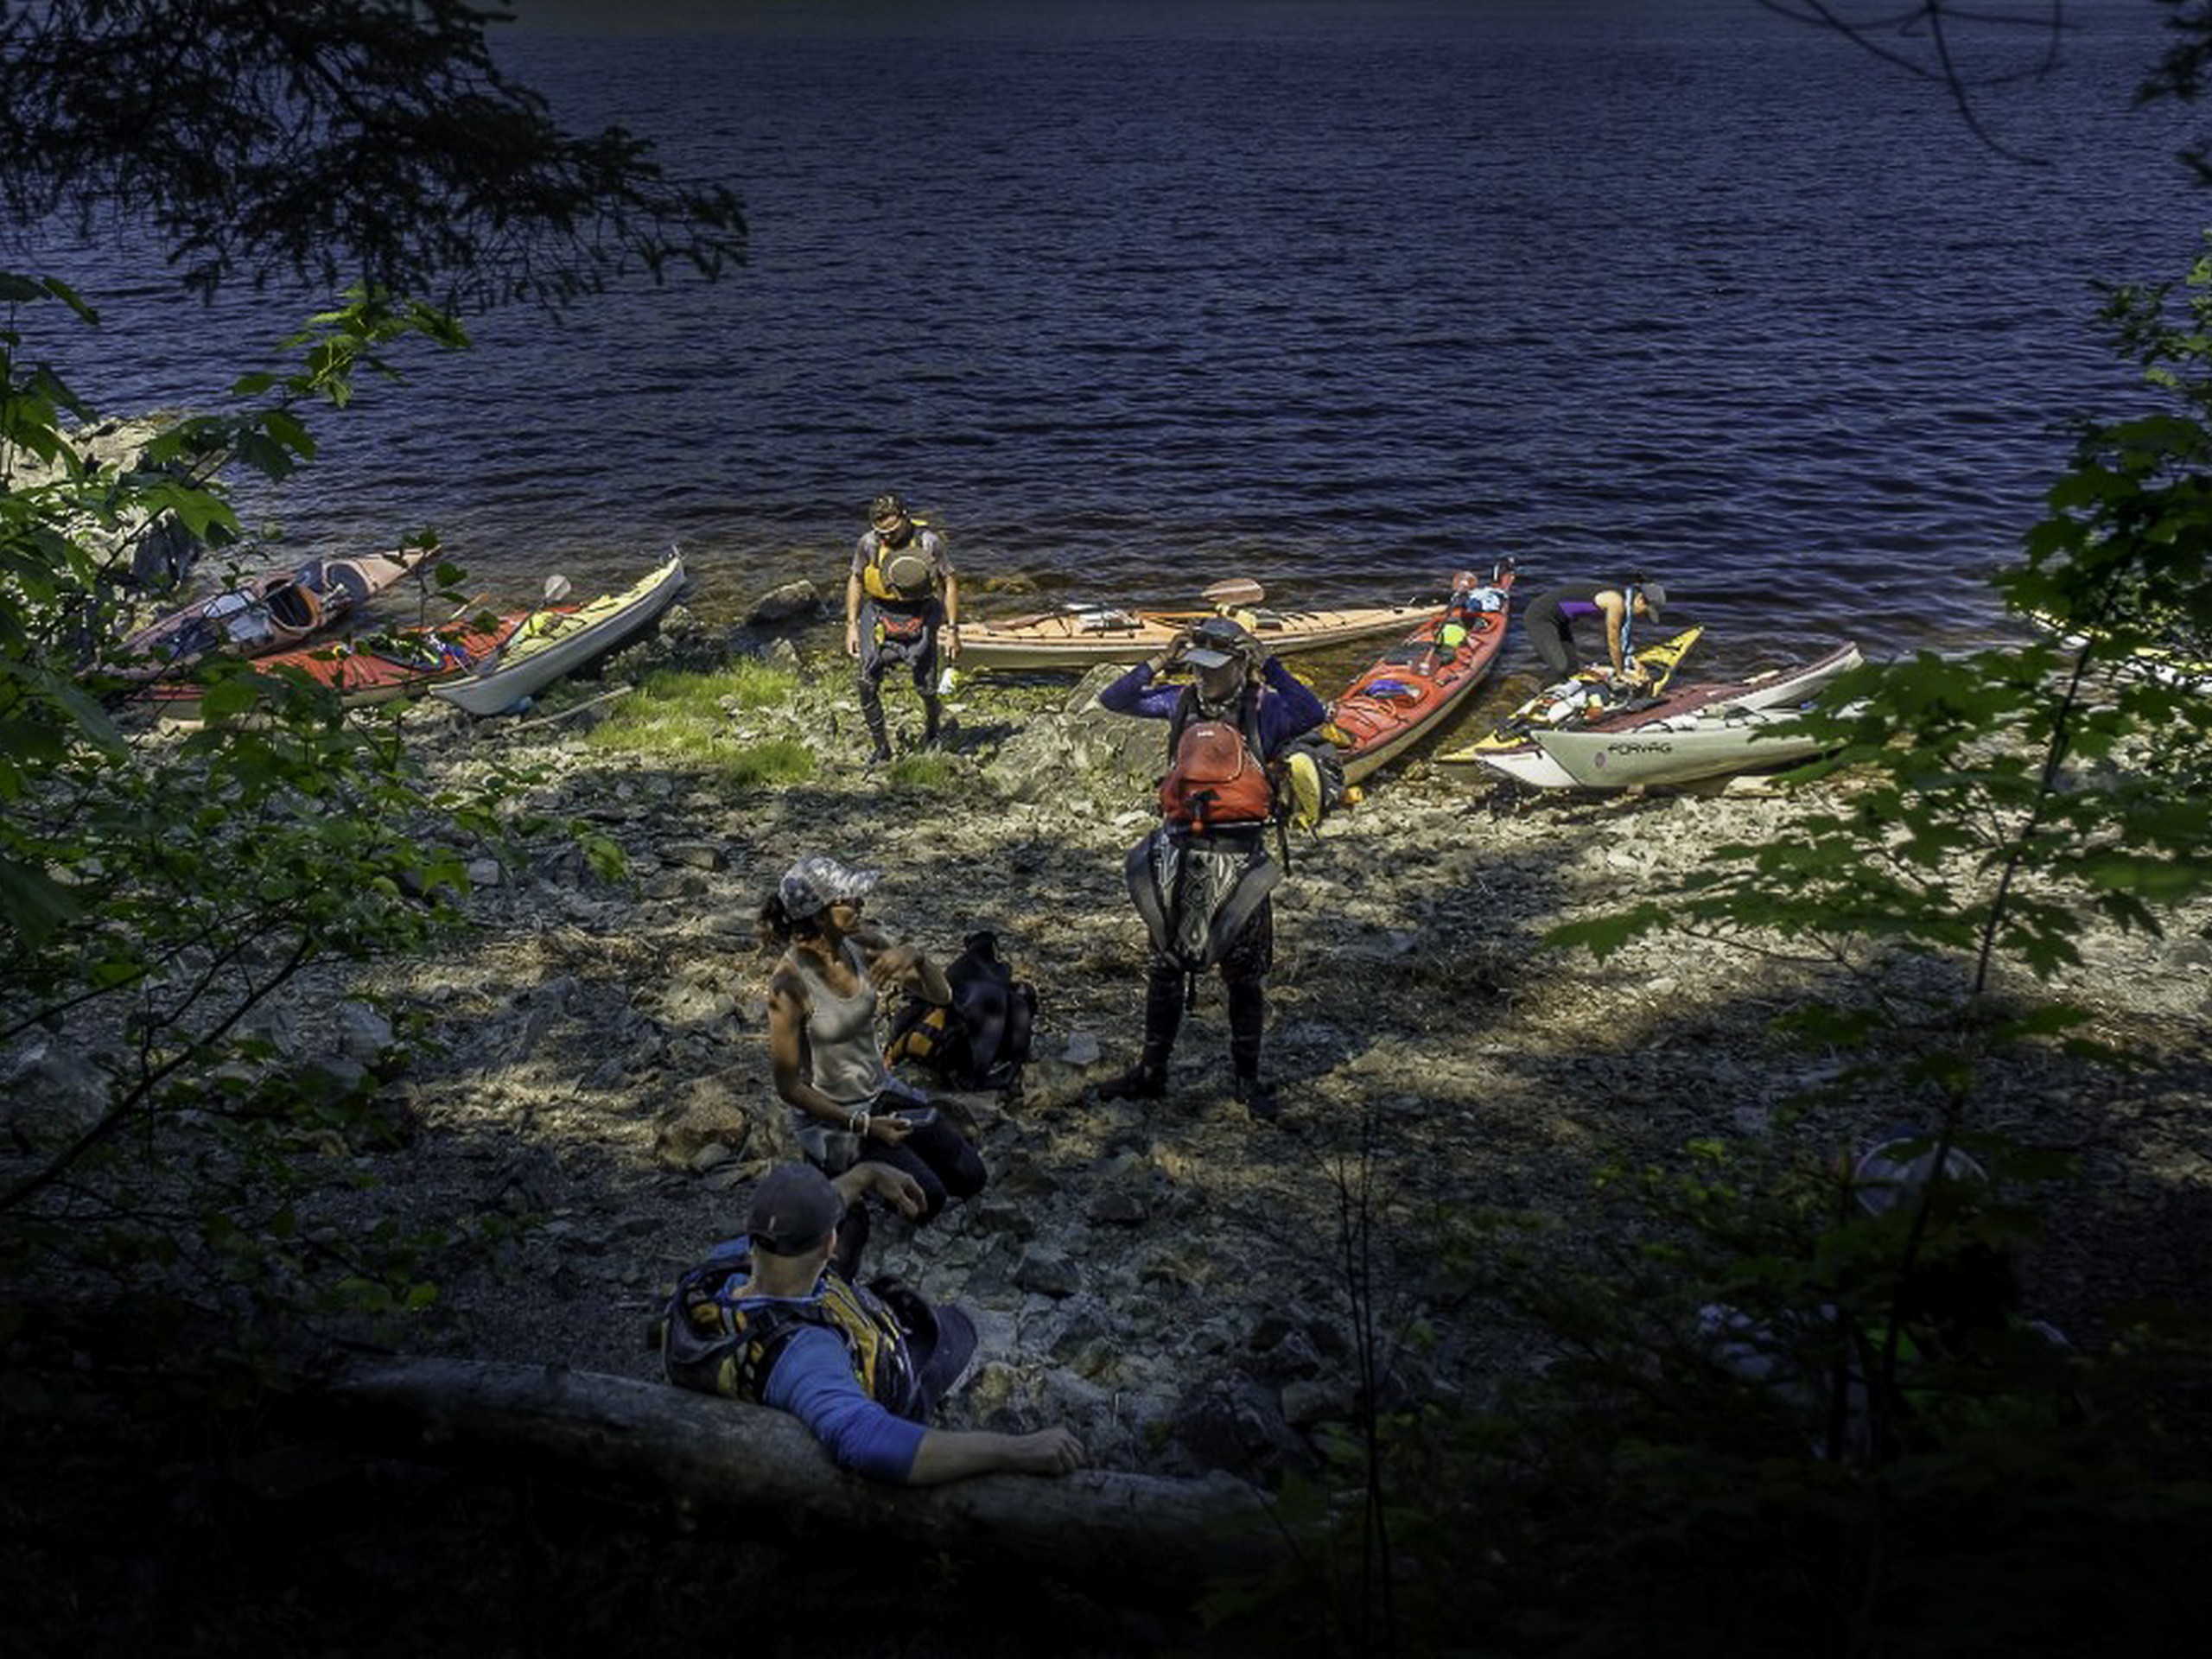 Group of kayakers embarked on the shore